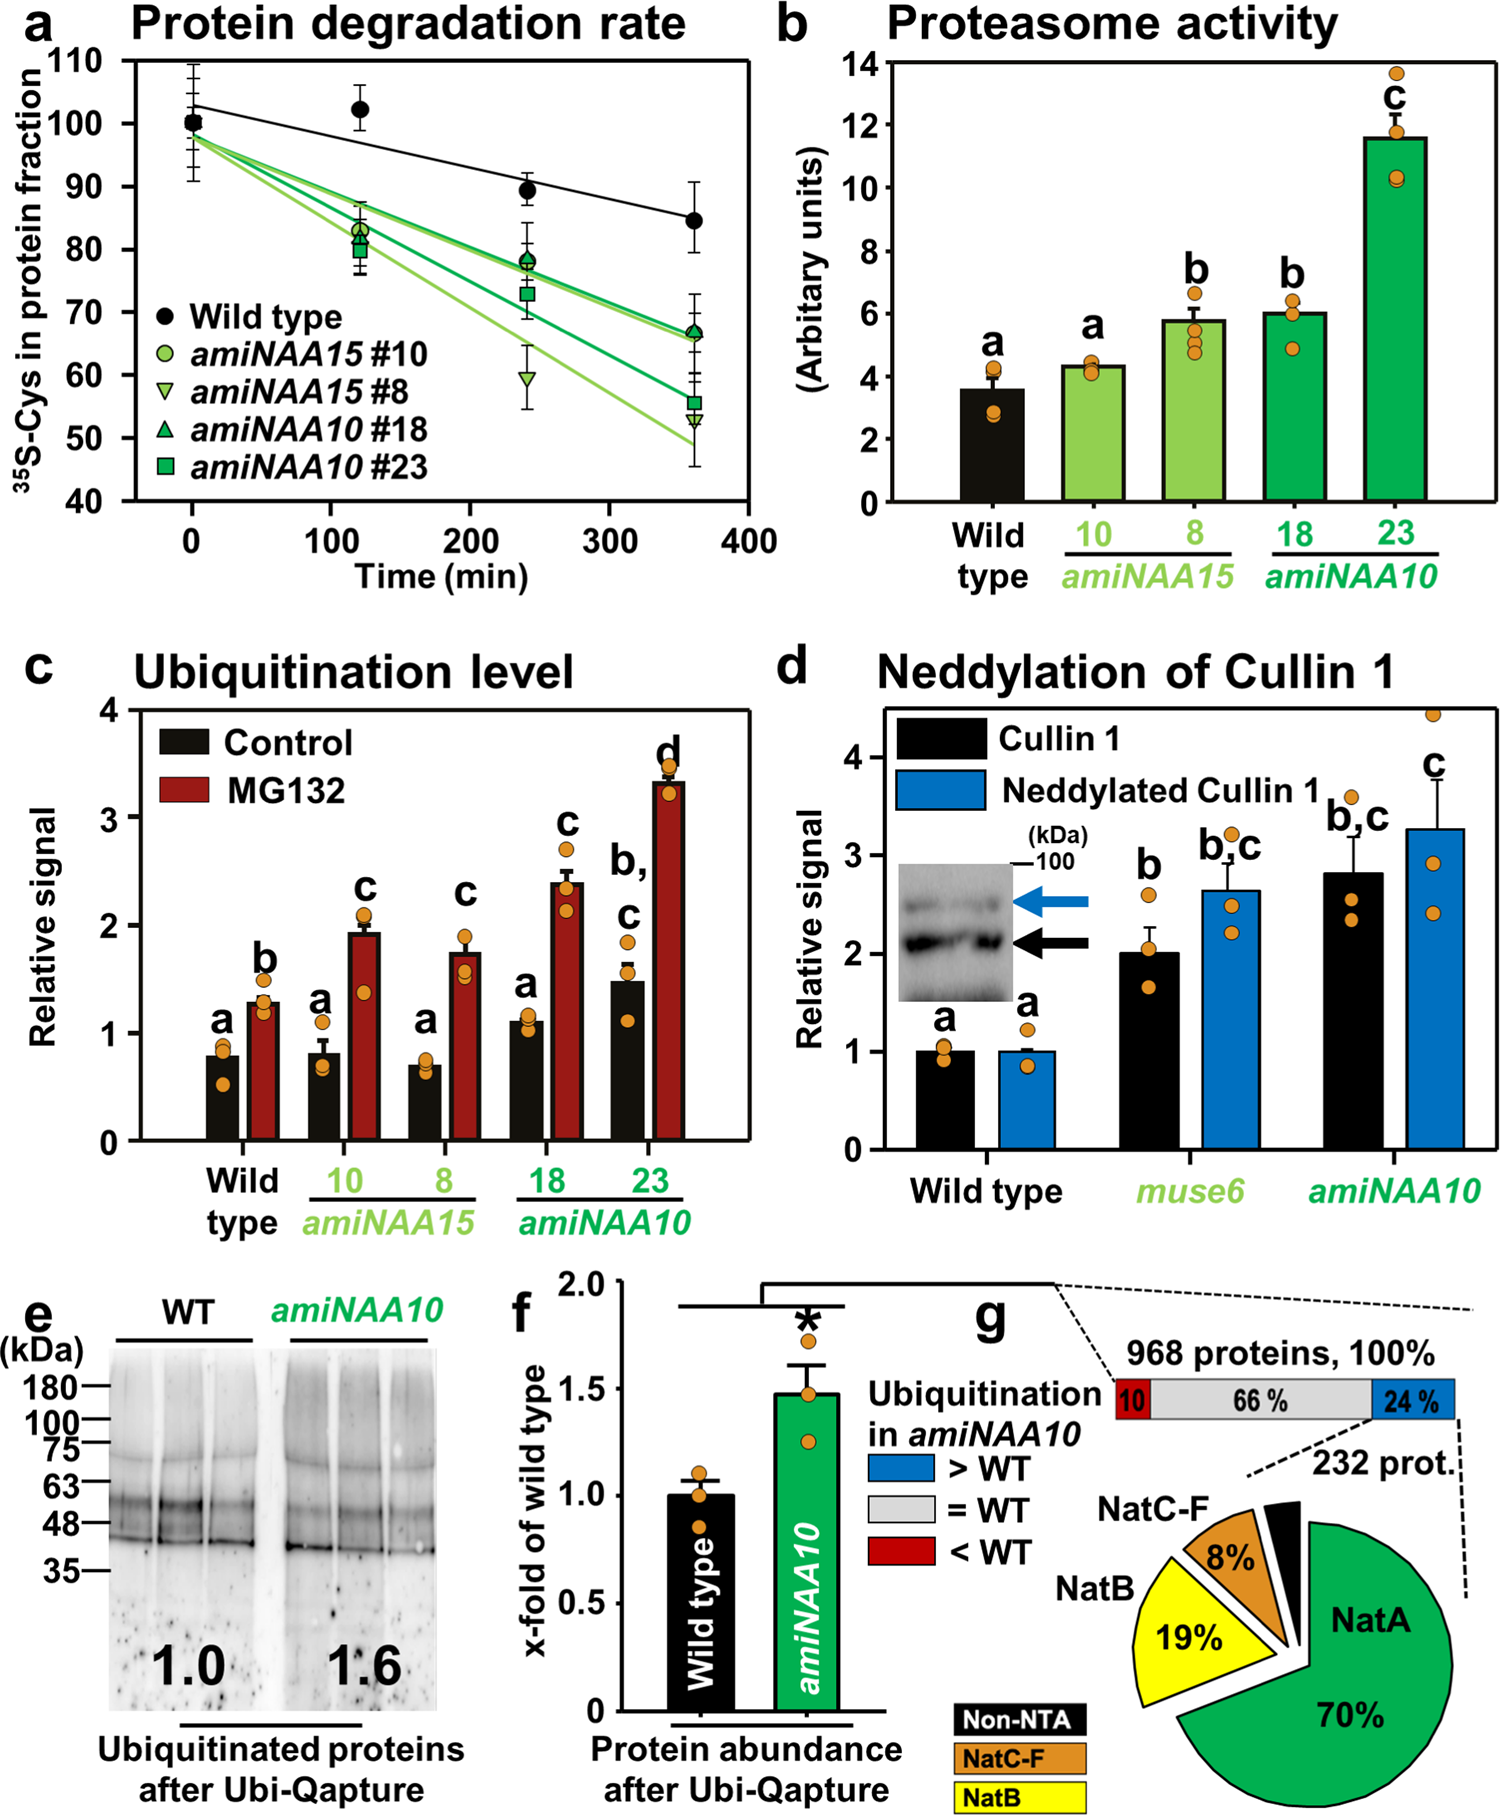 Cotranslational N-degron masking by acetylation promotes proteome stability  in plants | Nature Communications